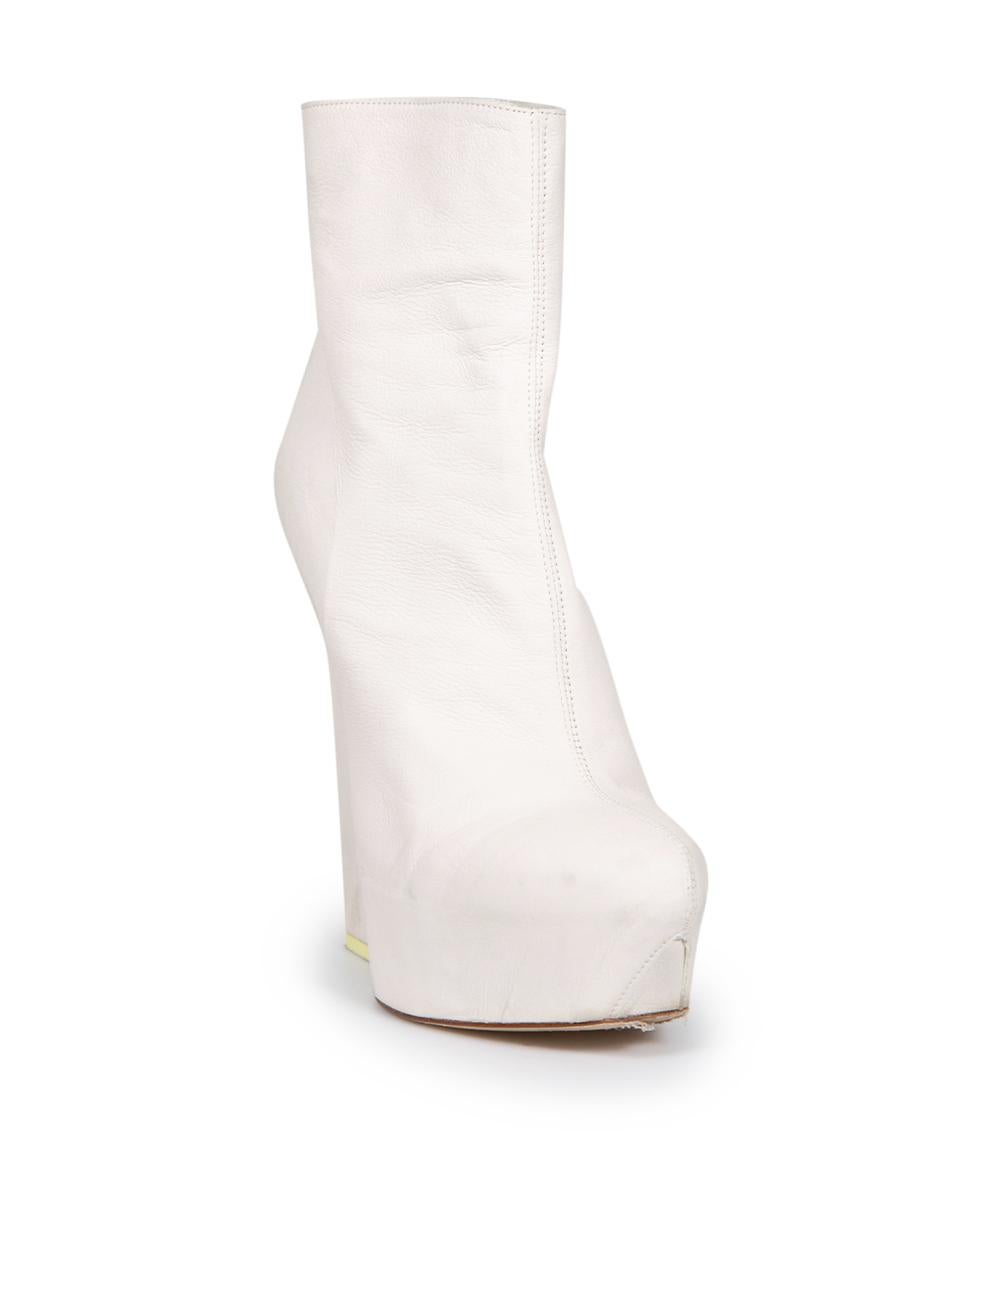 CONDITION is Good. General wear to boots is evident. Moderate signs of marks on the heels and front of the shoes. Abrasion on the back of the right shoe on this used Gareth Pugh designer resale item.
 
 
 
 Details
 
 
 White
 
 Leather
 
 Wedge